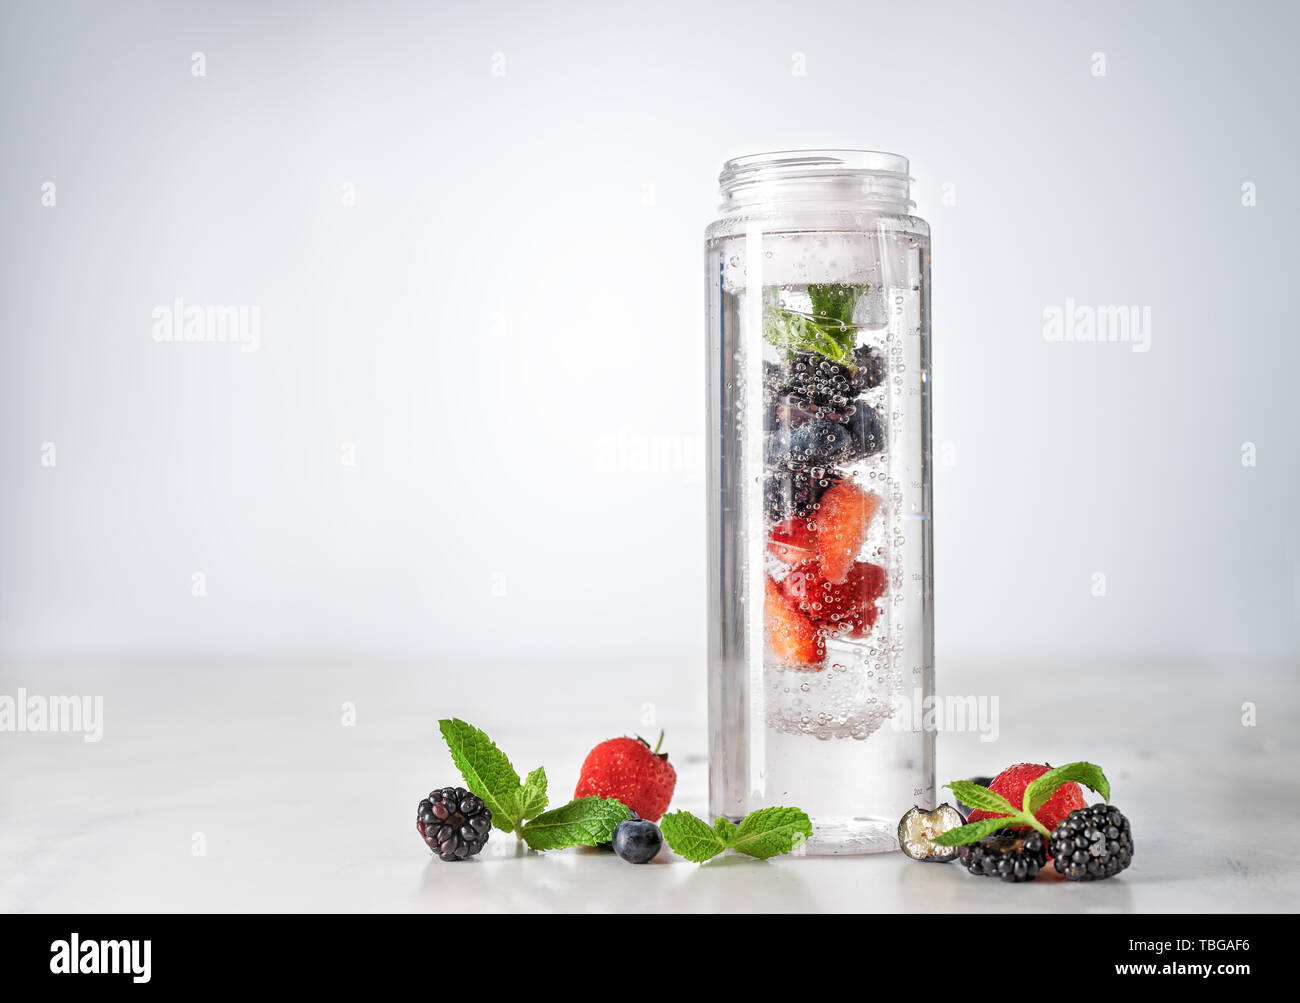 Infused water in plastic bottle with berries Stock Photo